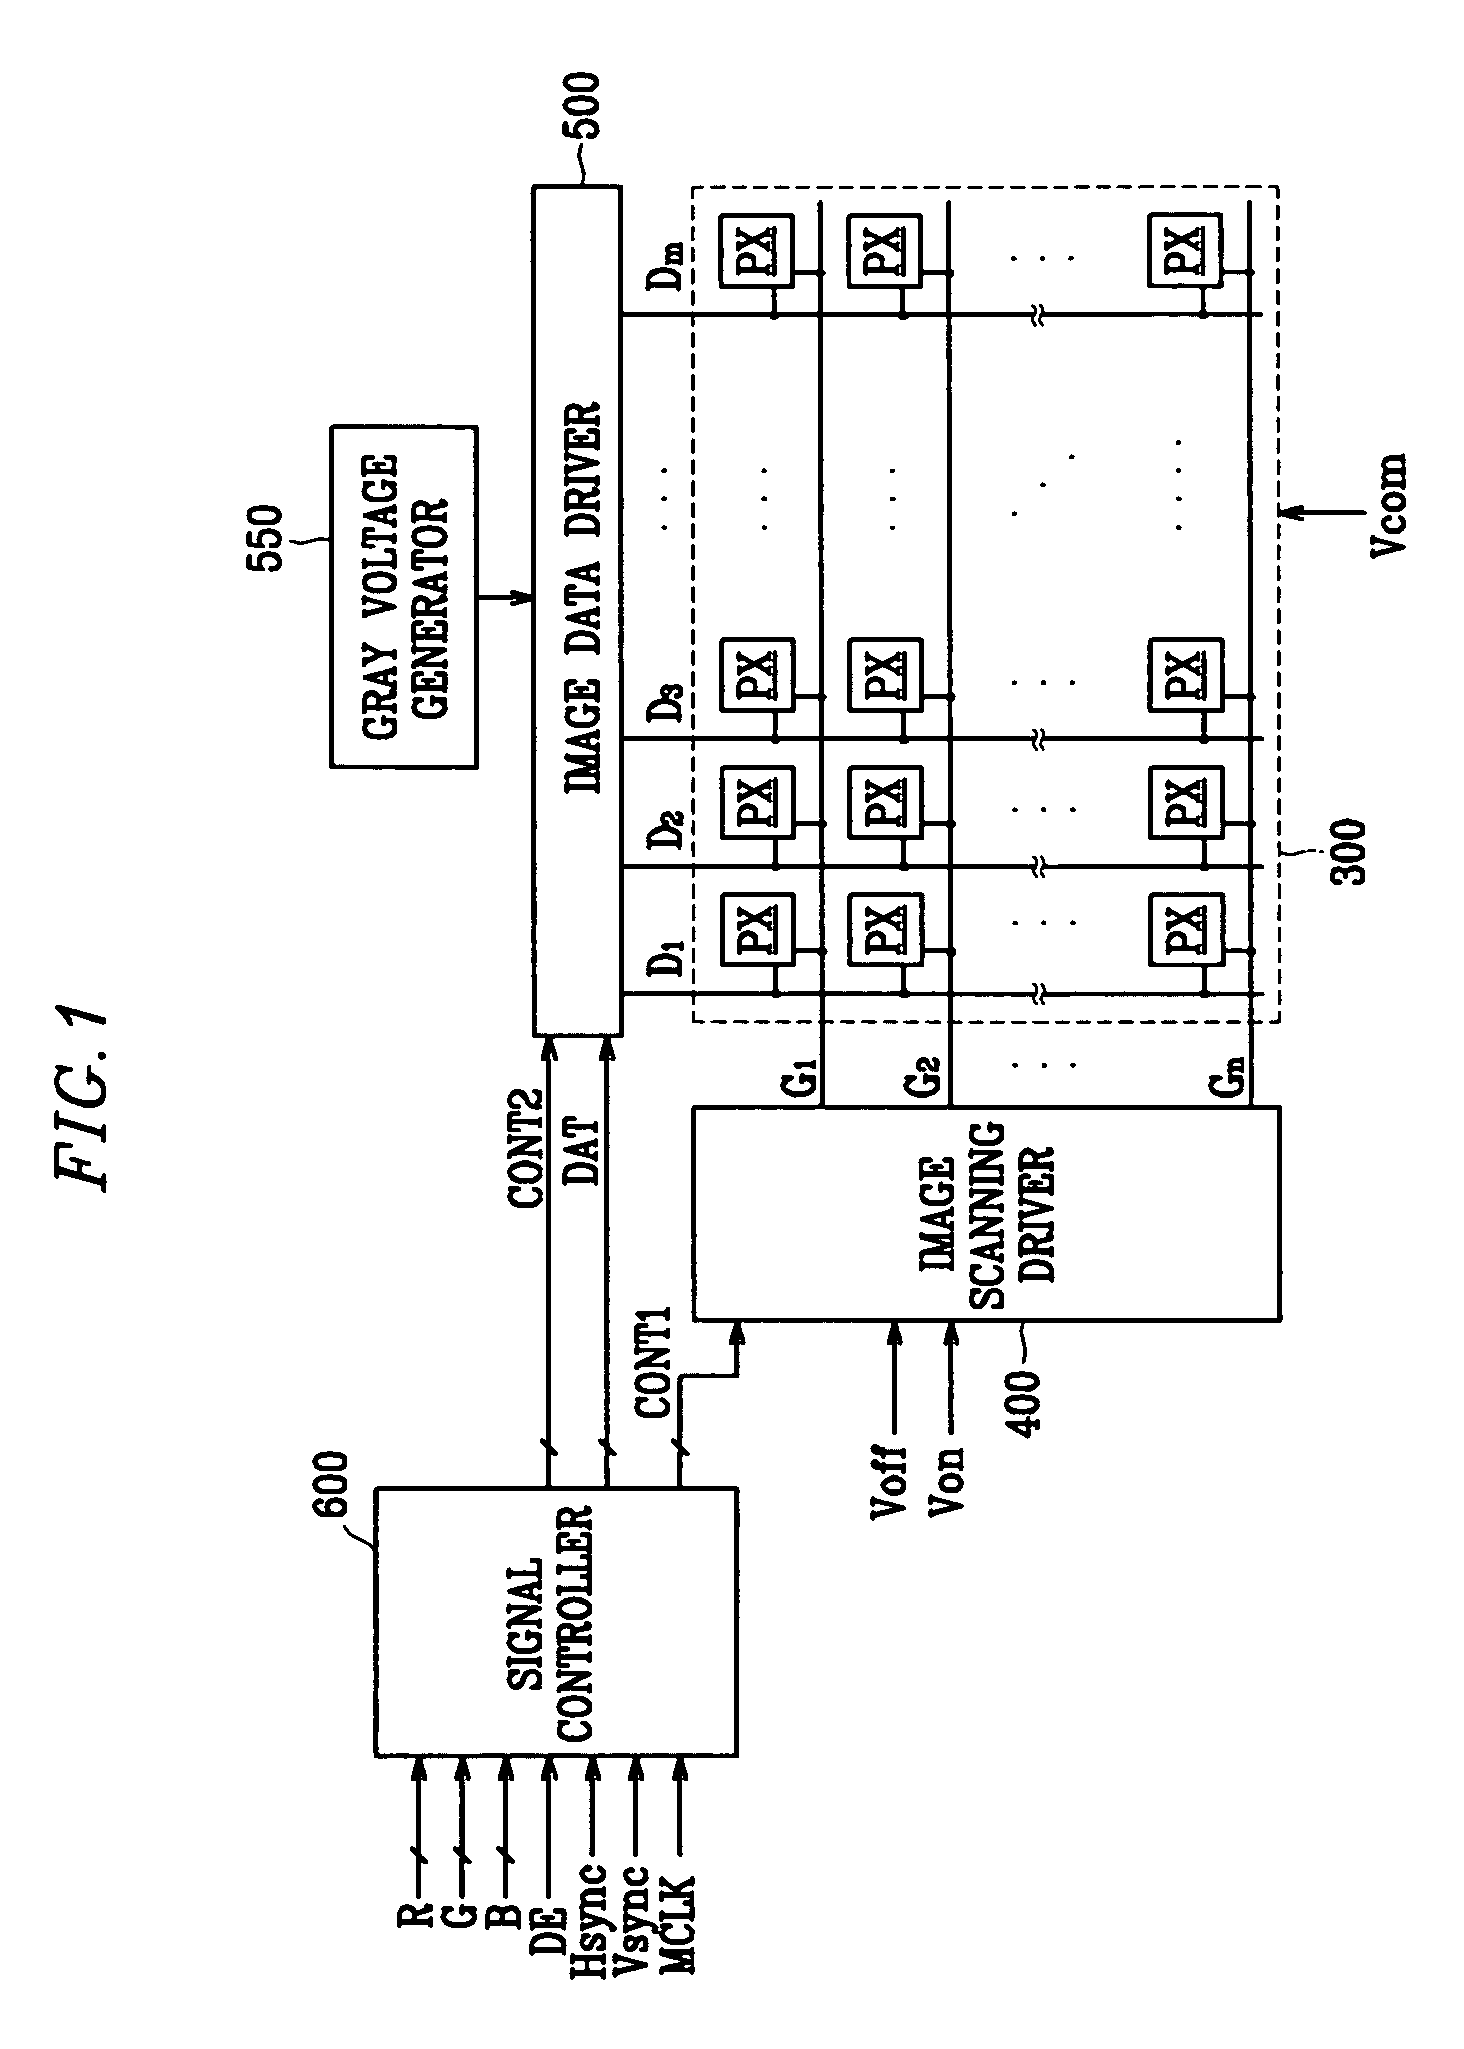 Liquid crystal display device having improved touch screen